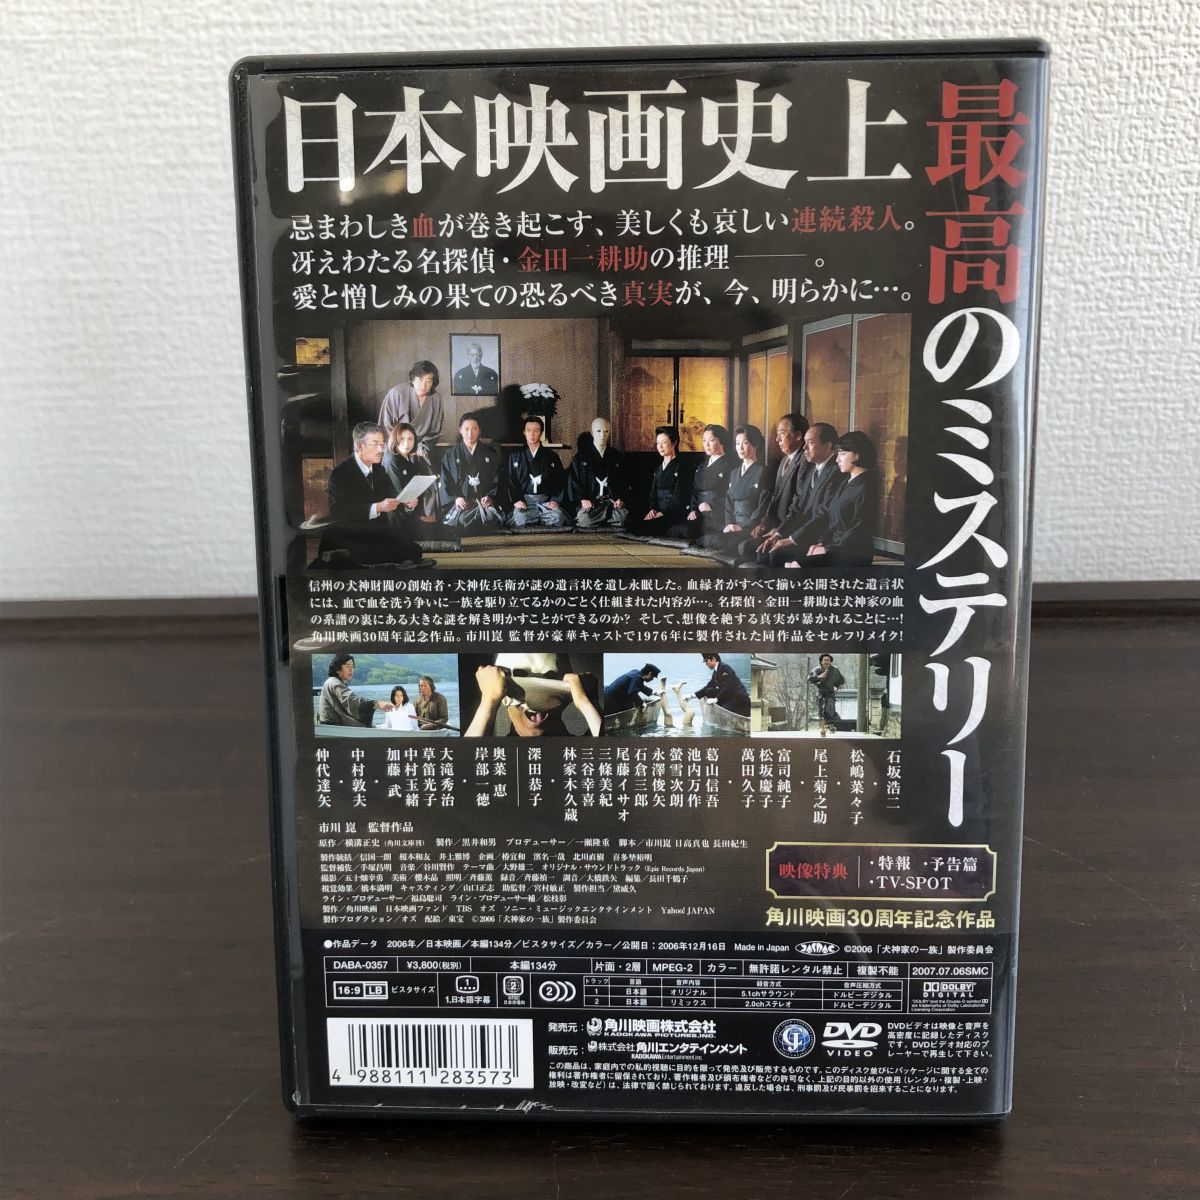  cell version dog god house. one group DVD